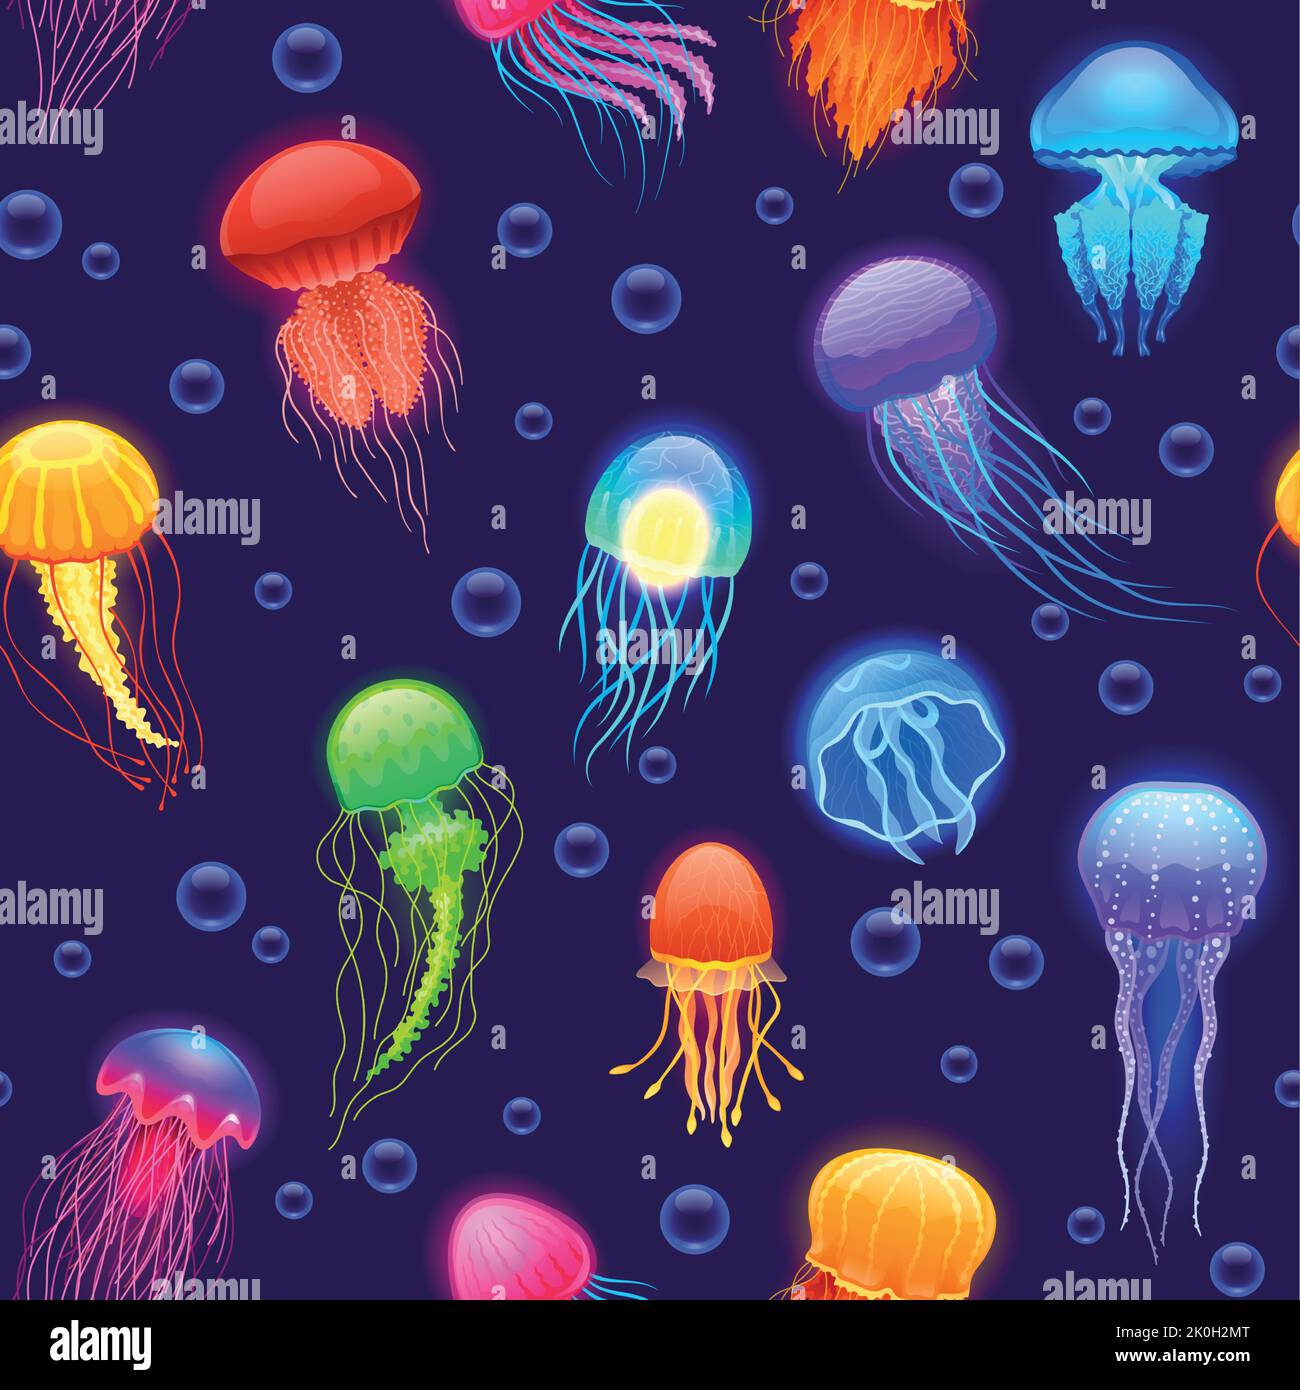 Jellyfish pattern. Seamless print of cute colorful cartoon sea animal, transparent underwater creatures of different shapes and colors. Vector texture Stock Vector